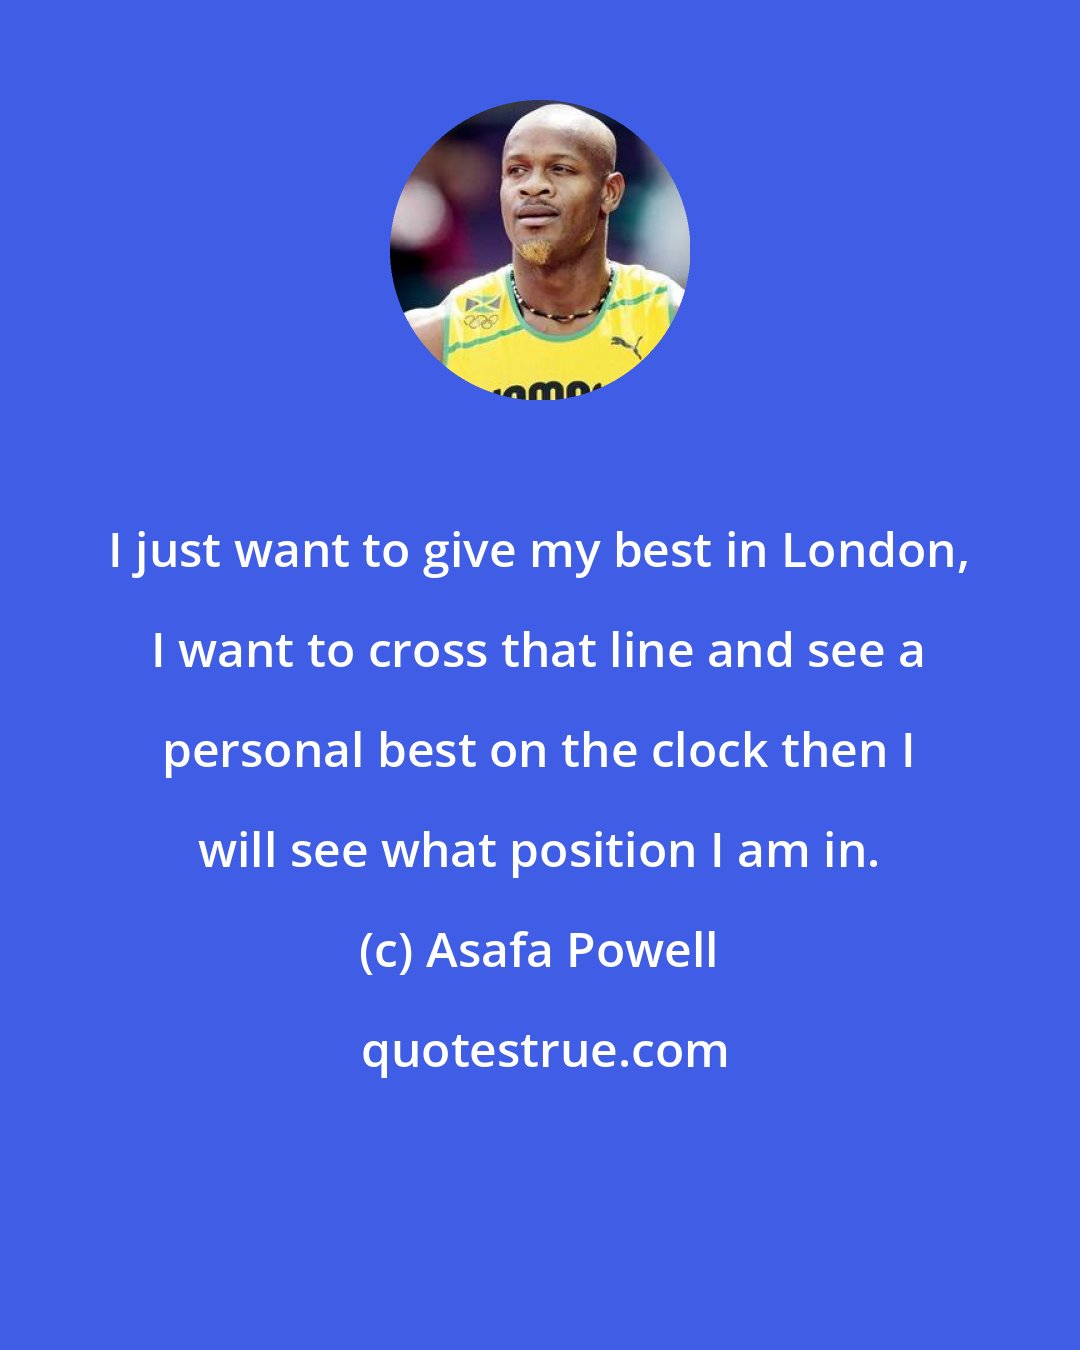 Asafa Powell: I just want to give my best in London, I want to cross that line and see a personal best on the clock then I will see what position I am in.